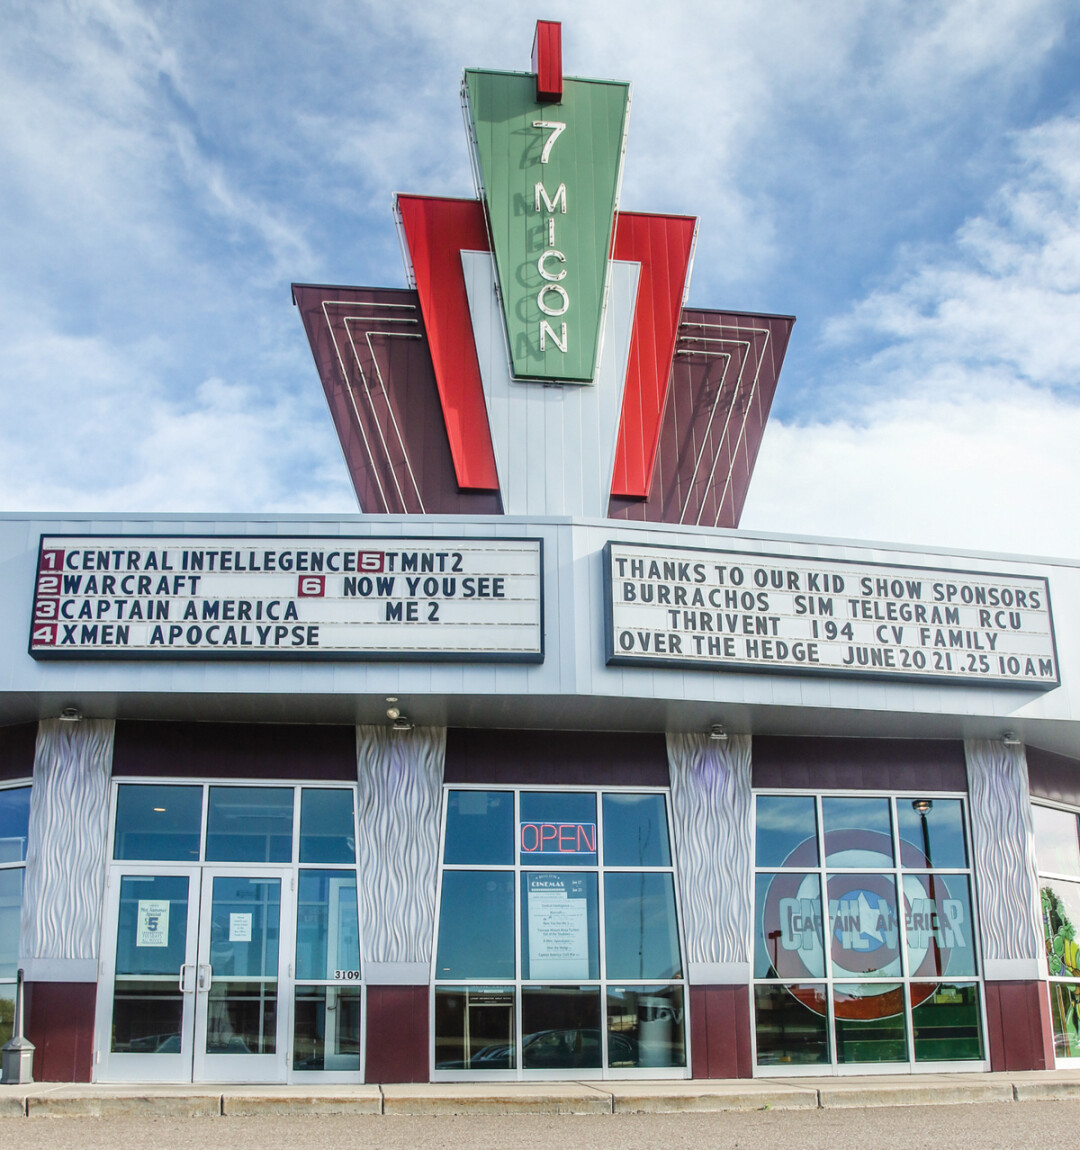 POPULAR MICON-ICS. Micon Cinemas’ seven-screen Eau Claire theater will see aesthetic upgrades this fall, including building out into the parking lot to add a bar area and sprucing up auditoriums.